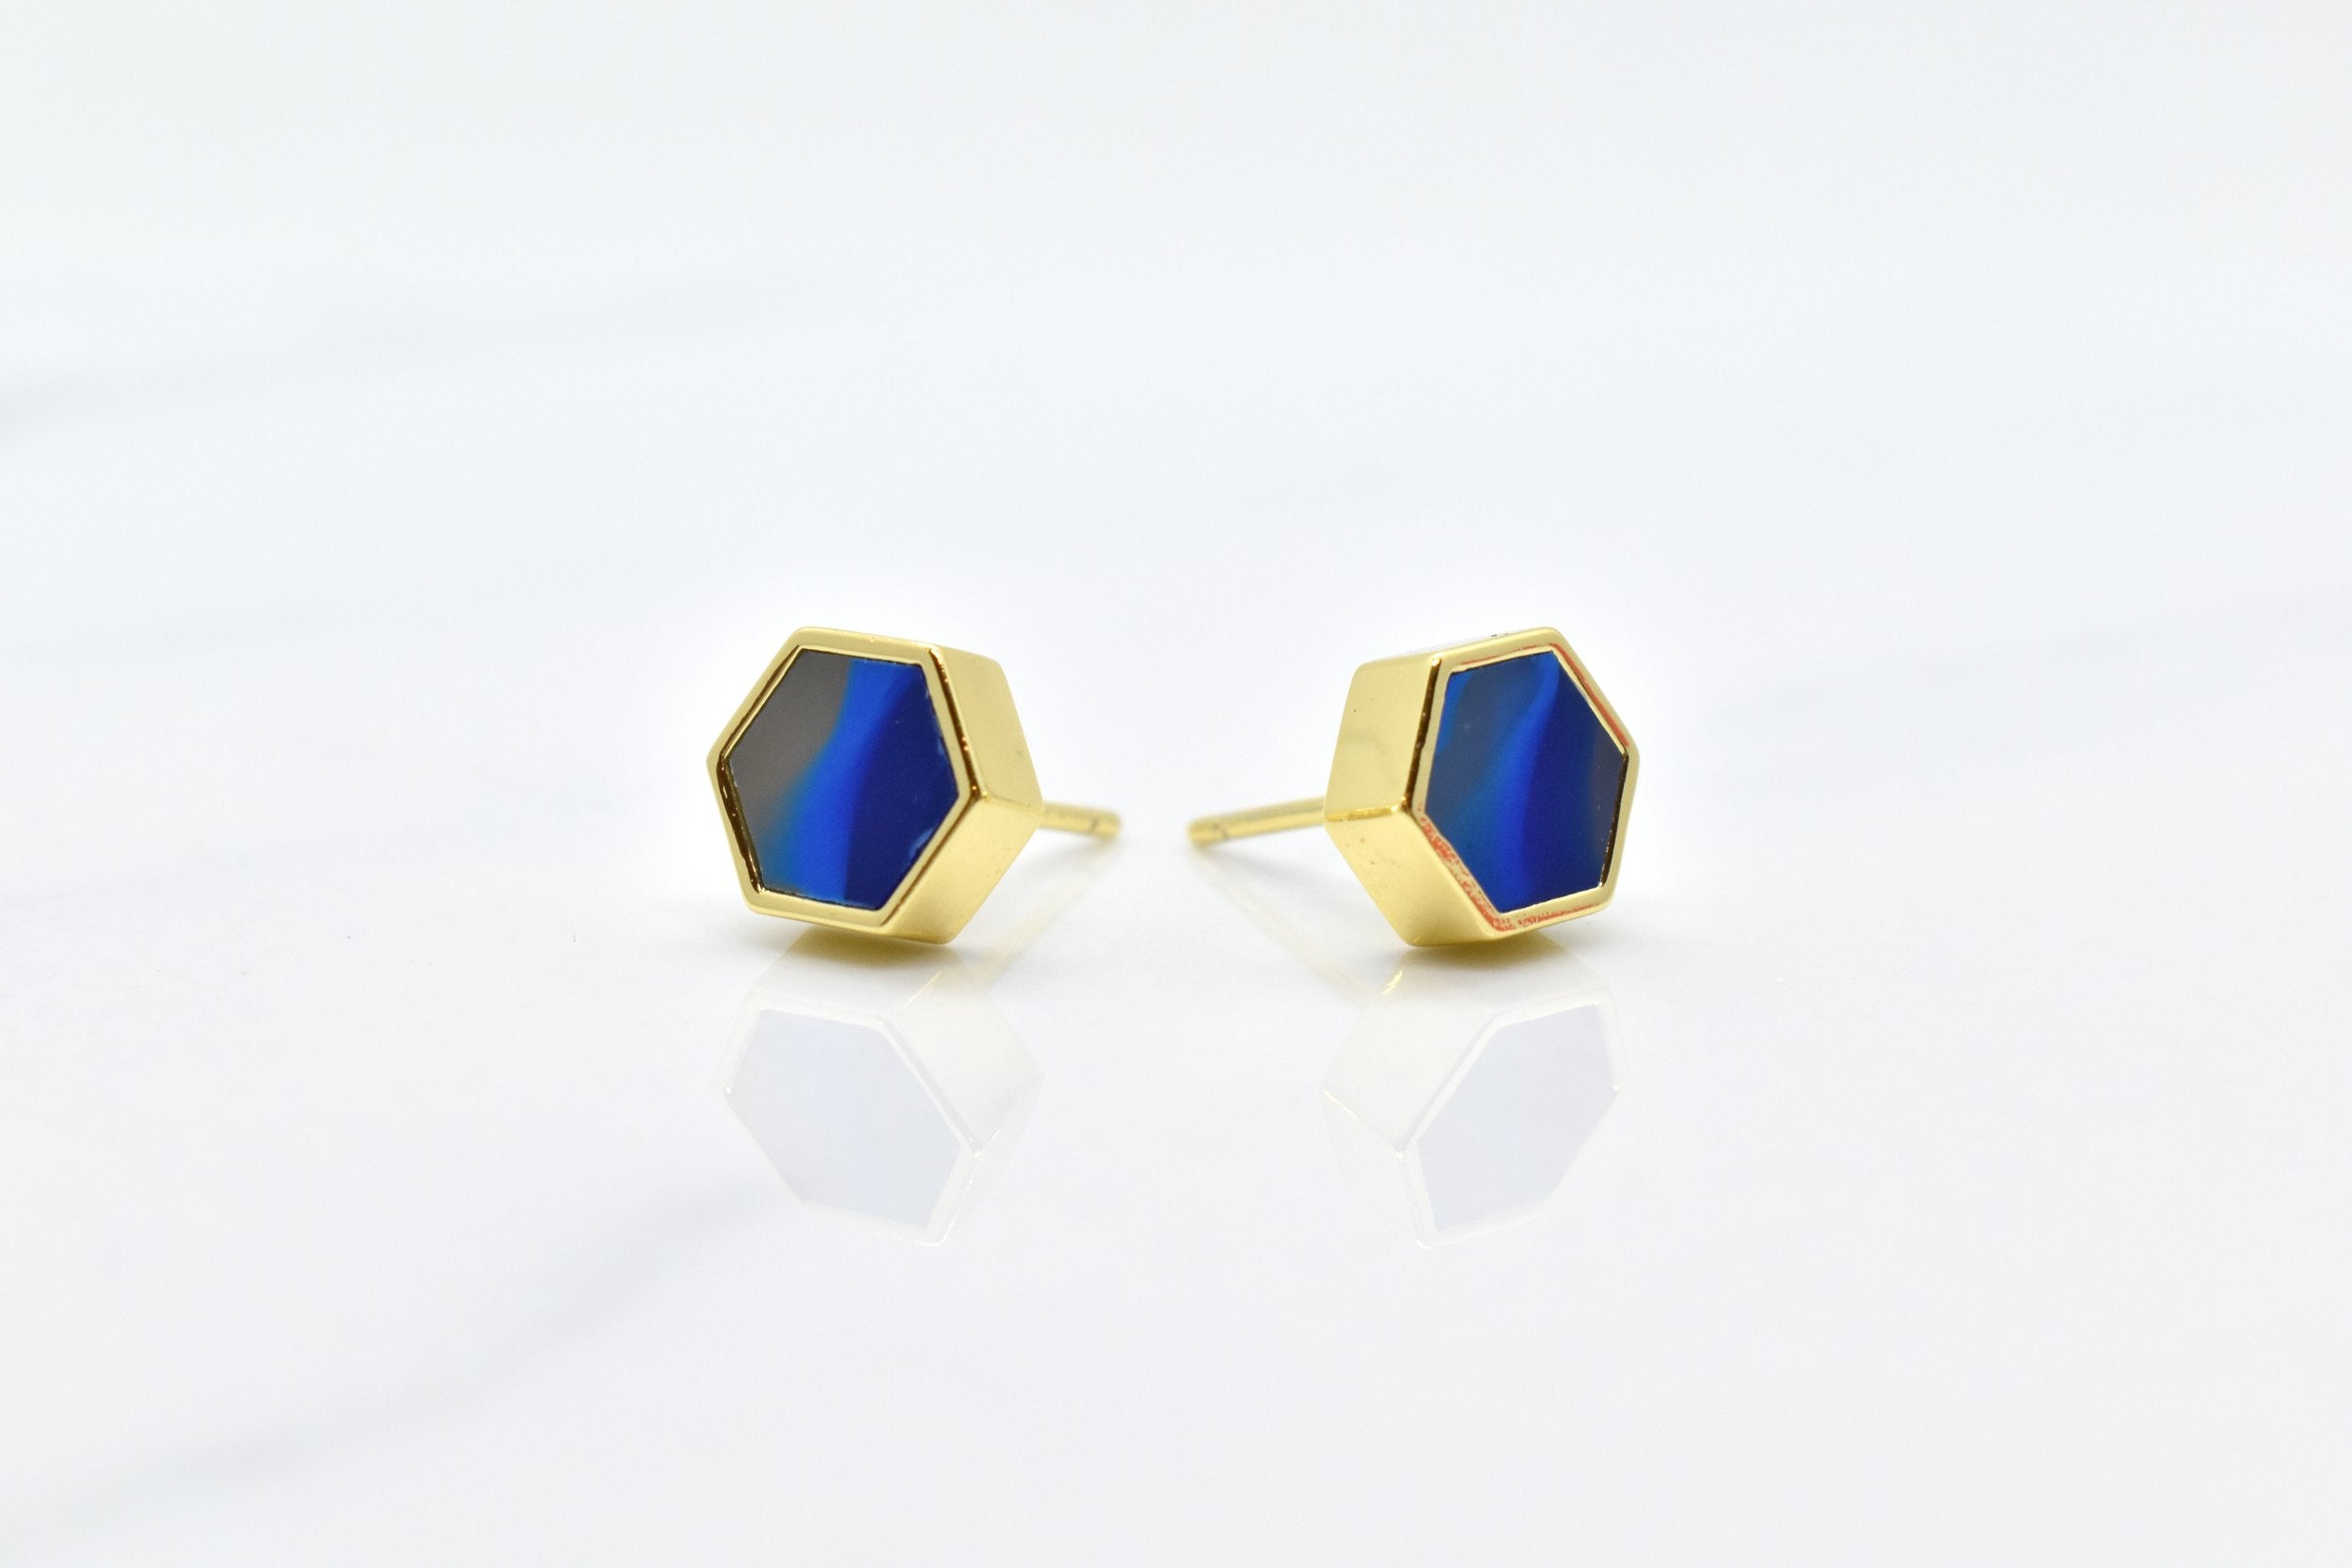 blue and gold hexagon stud earring set with swirling sapphire texture and 14k gold hexagon shape against a white background